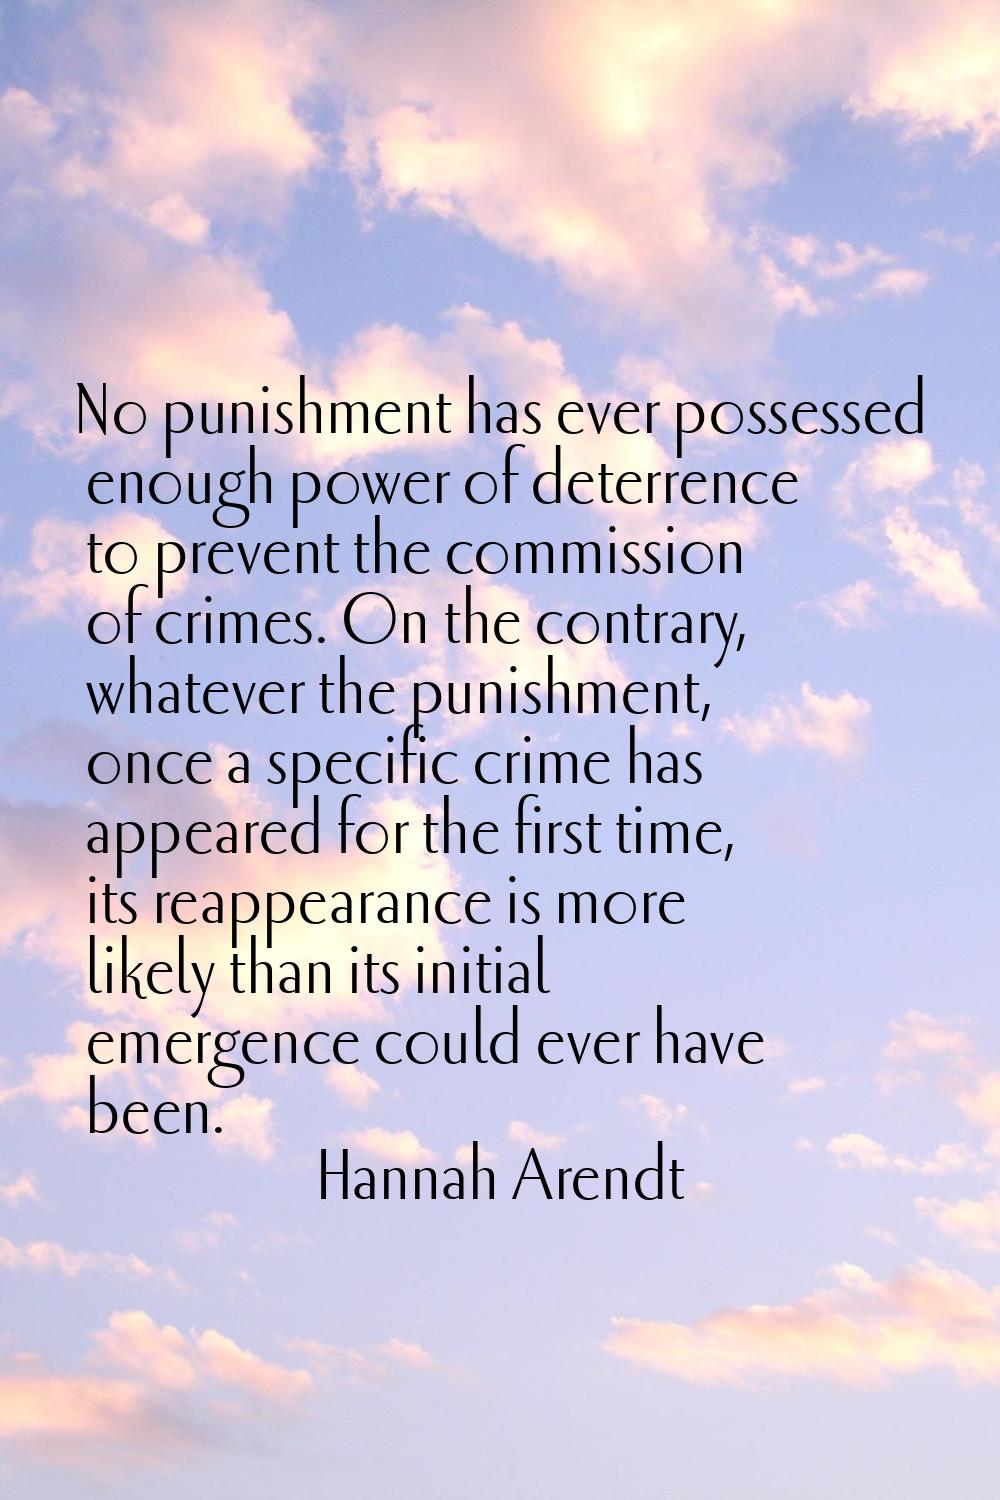 No punishment has ever possessed enough power of deterrence to prevent the commission of crimes. On